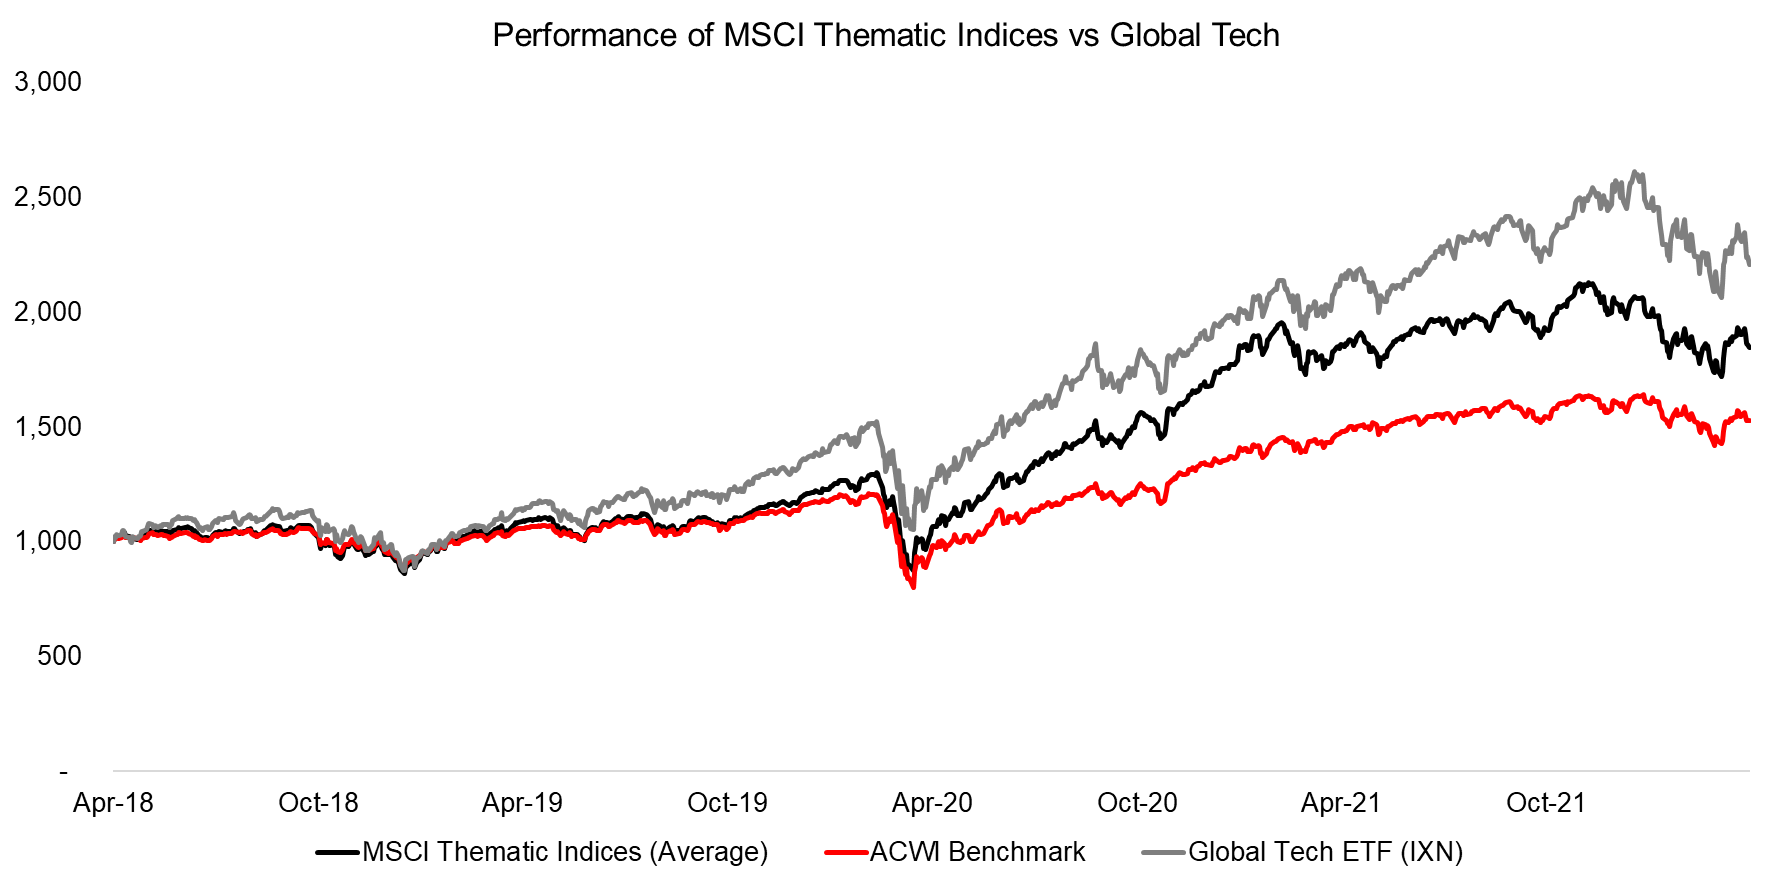 Performance of MSCI Thematic Indices vs Global Tech